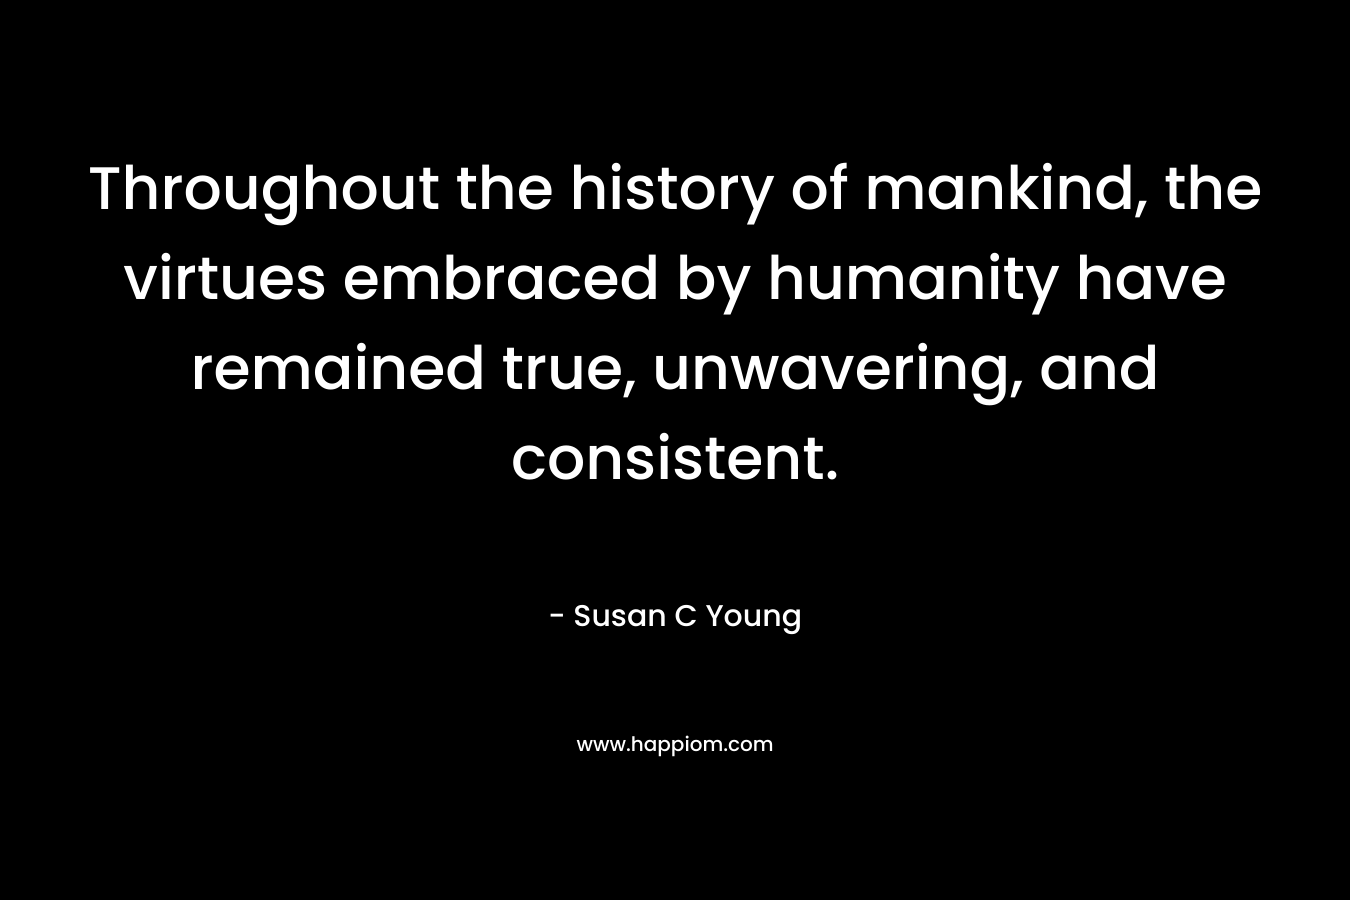 Throughout the history of mankind, the virtues embraced by humanity have remained true, unwavering, and consistent. – Susan C Young